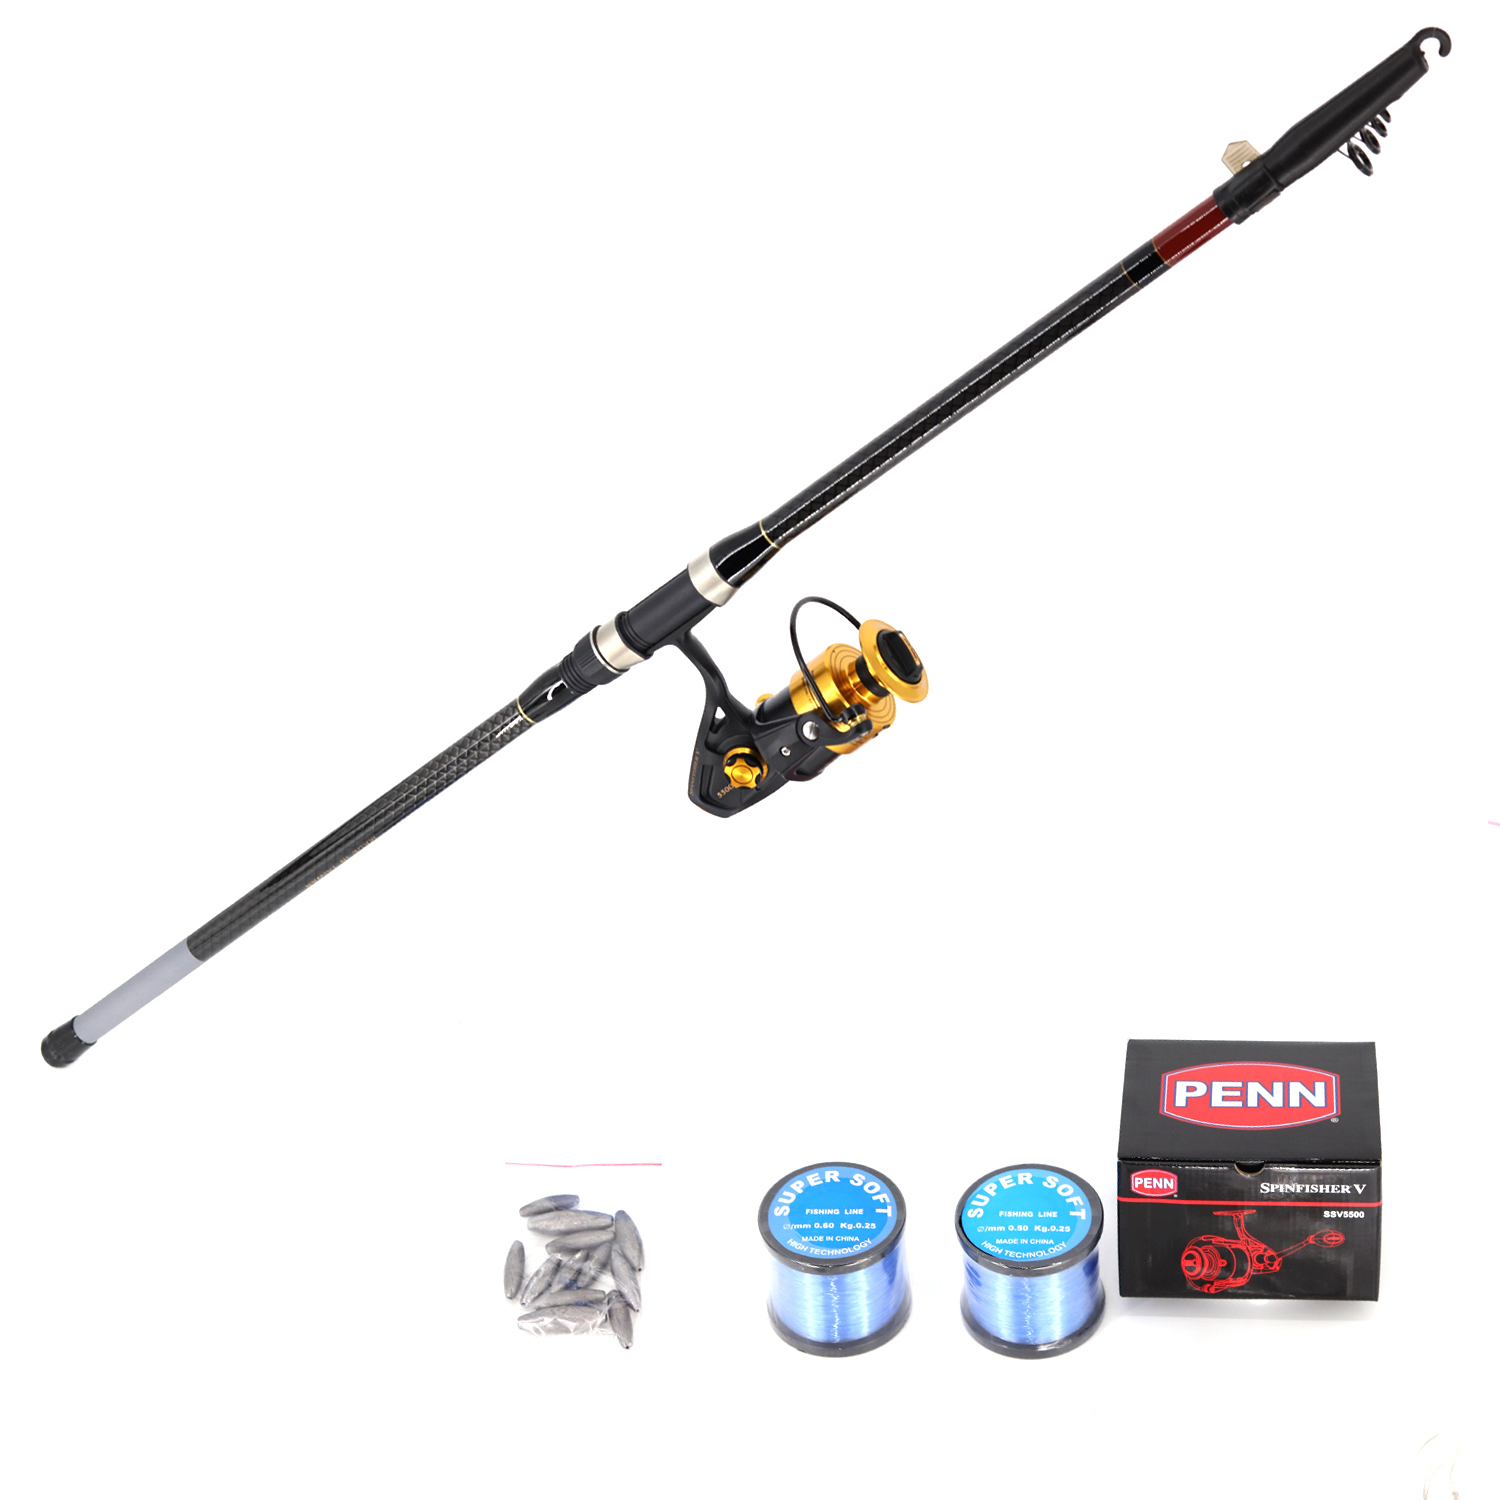 Shore Fishing (Pilot 3m and Penn V5500 including Nylon line with rigs and sinkers) Combo